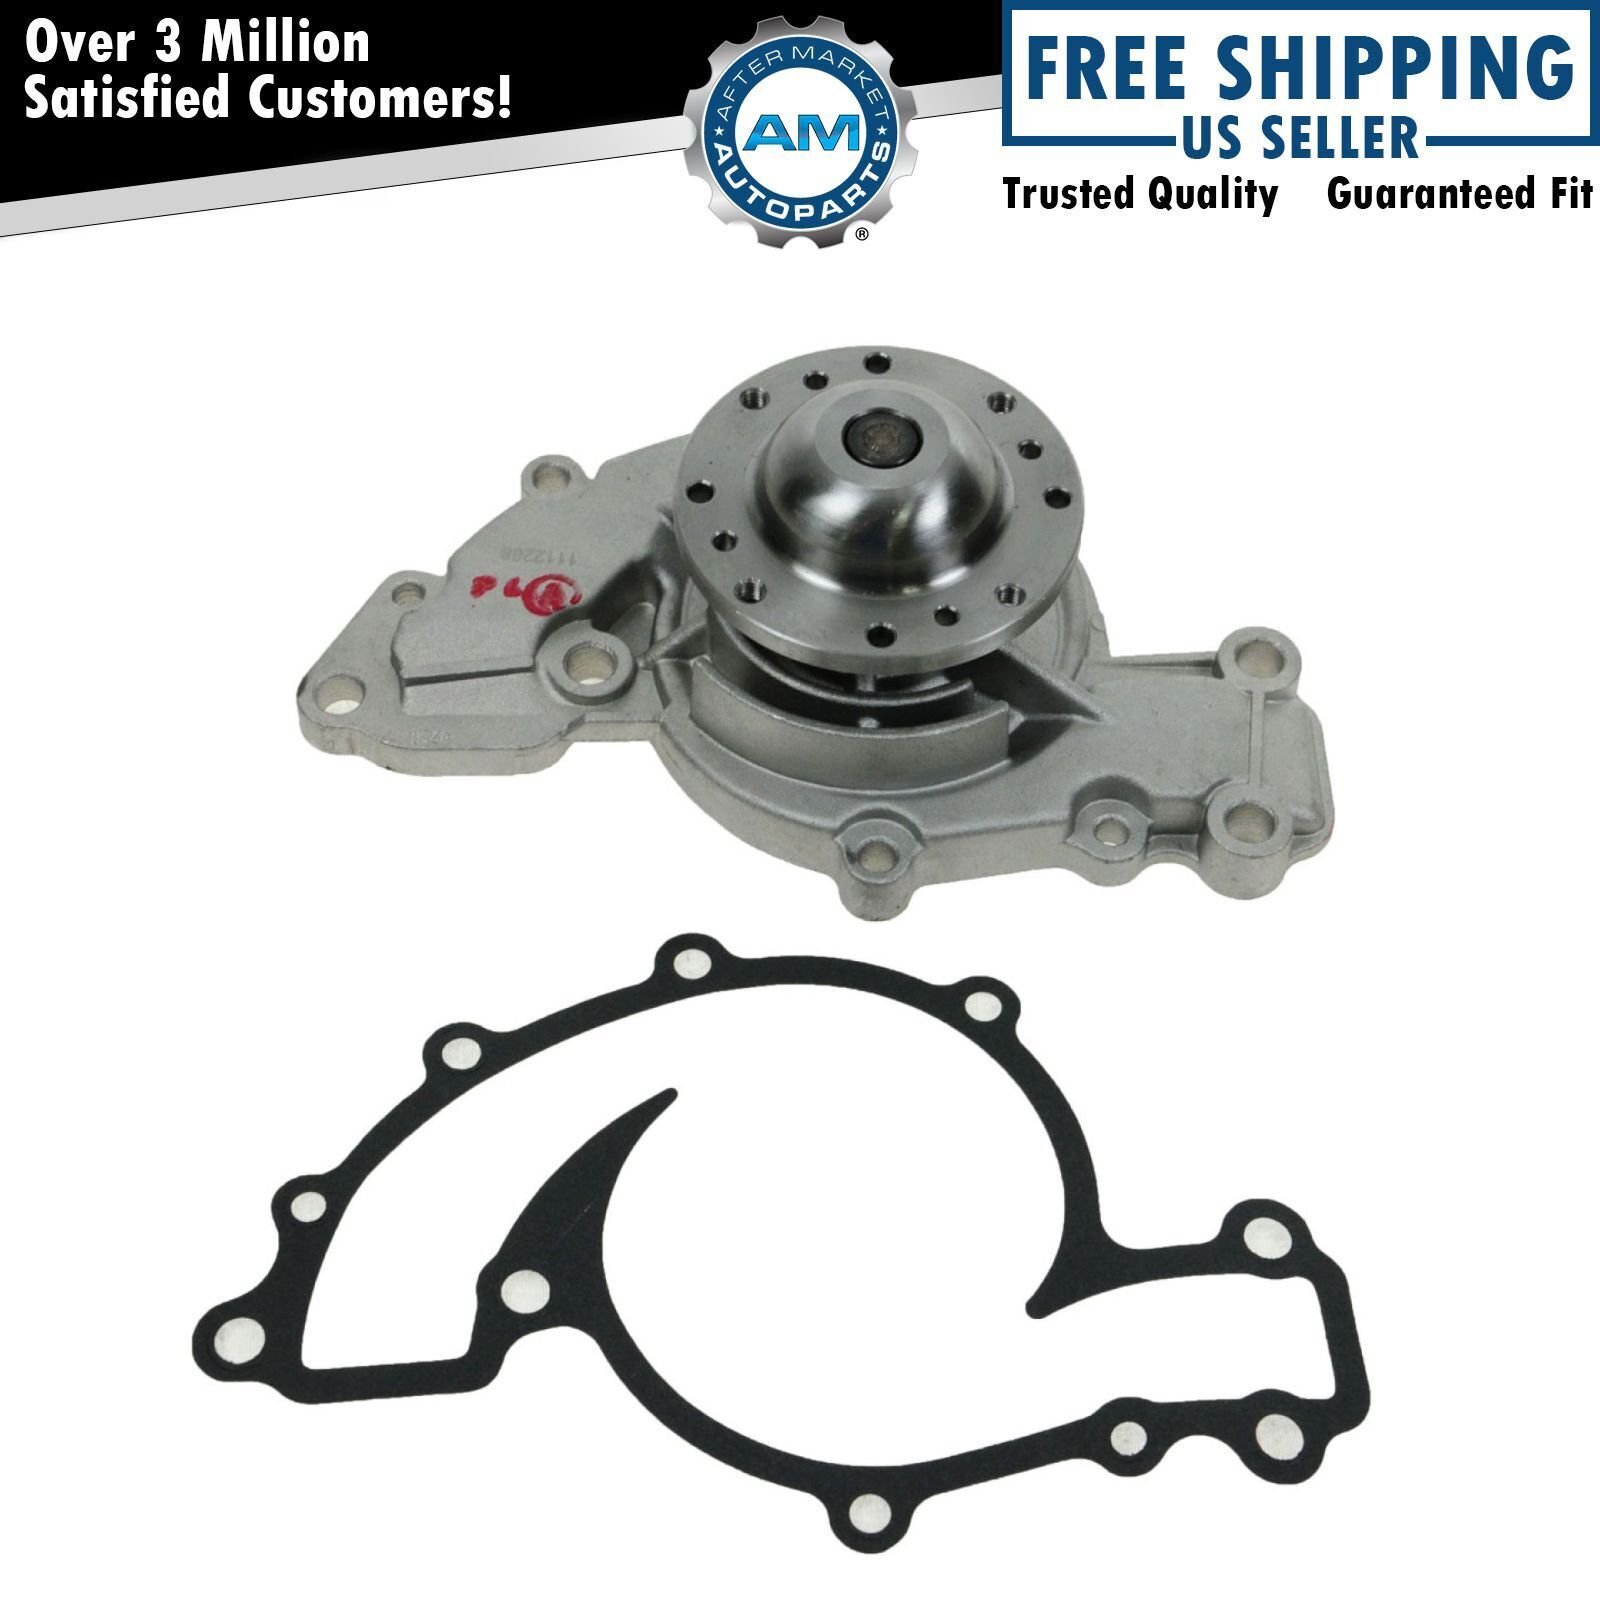 Engine Water Pump Direct Fit for Buick Chevy Olds Pontiac 3.8L Brand New